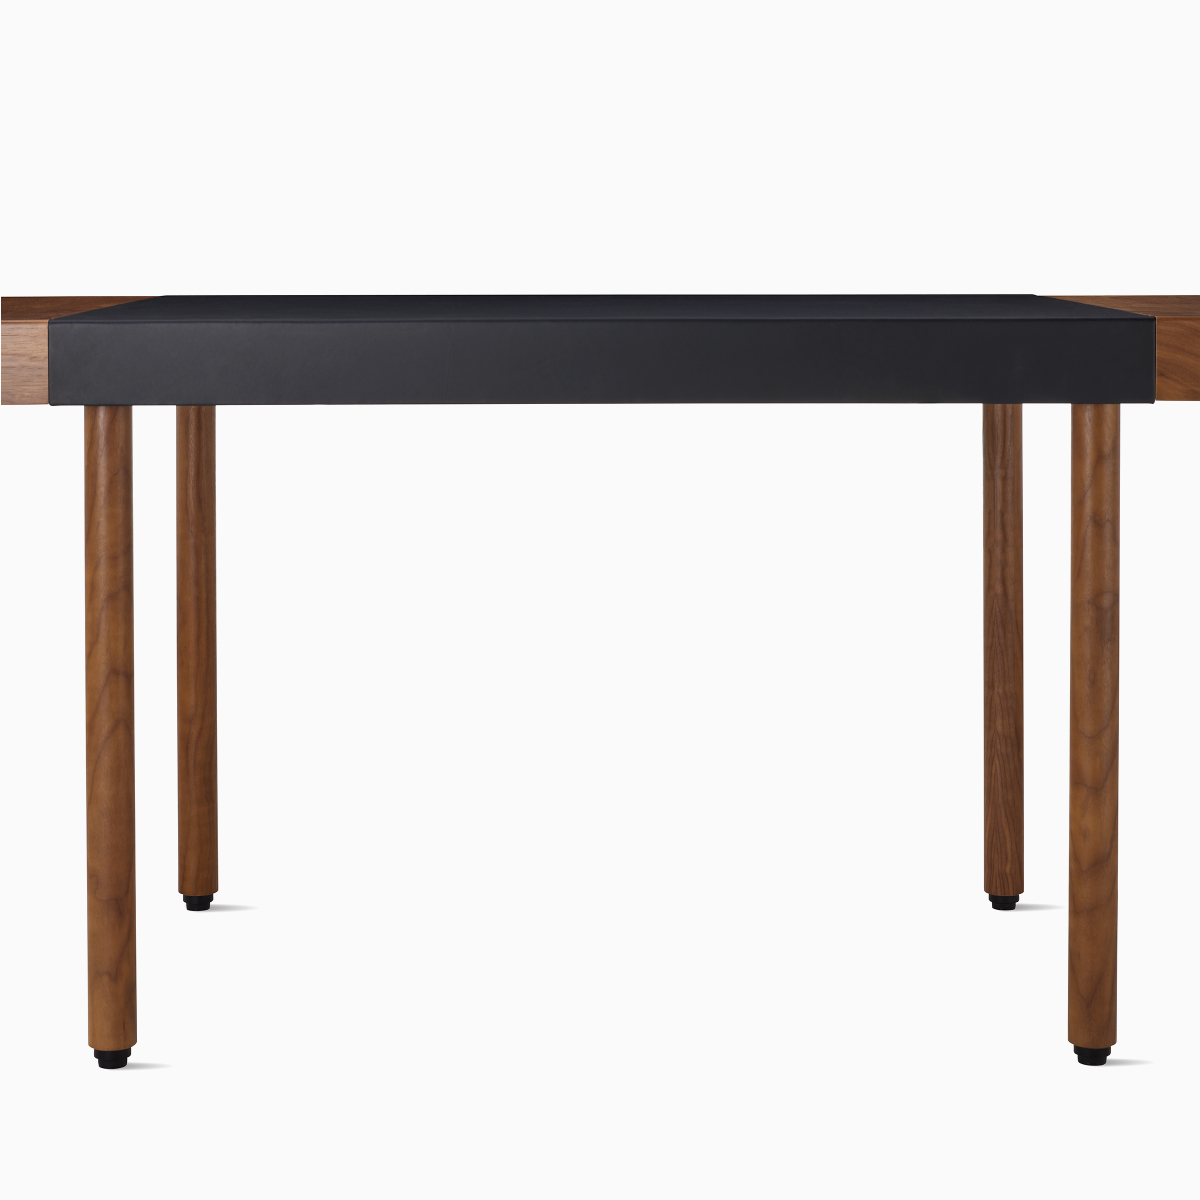 Leatherwrap SIt-to-Stand Desk in walnut and black Leather, front viewl